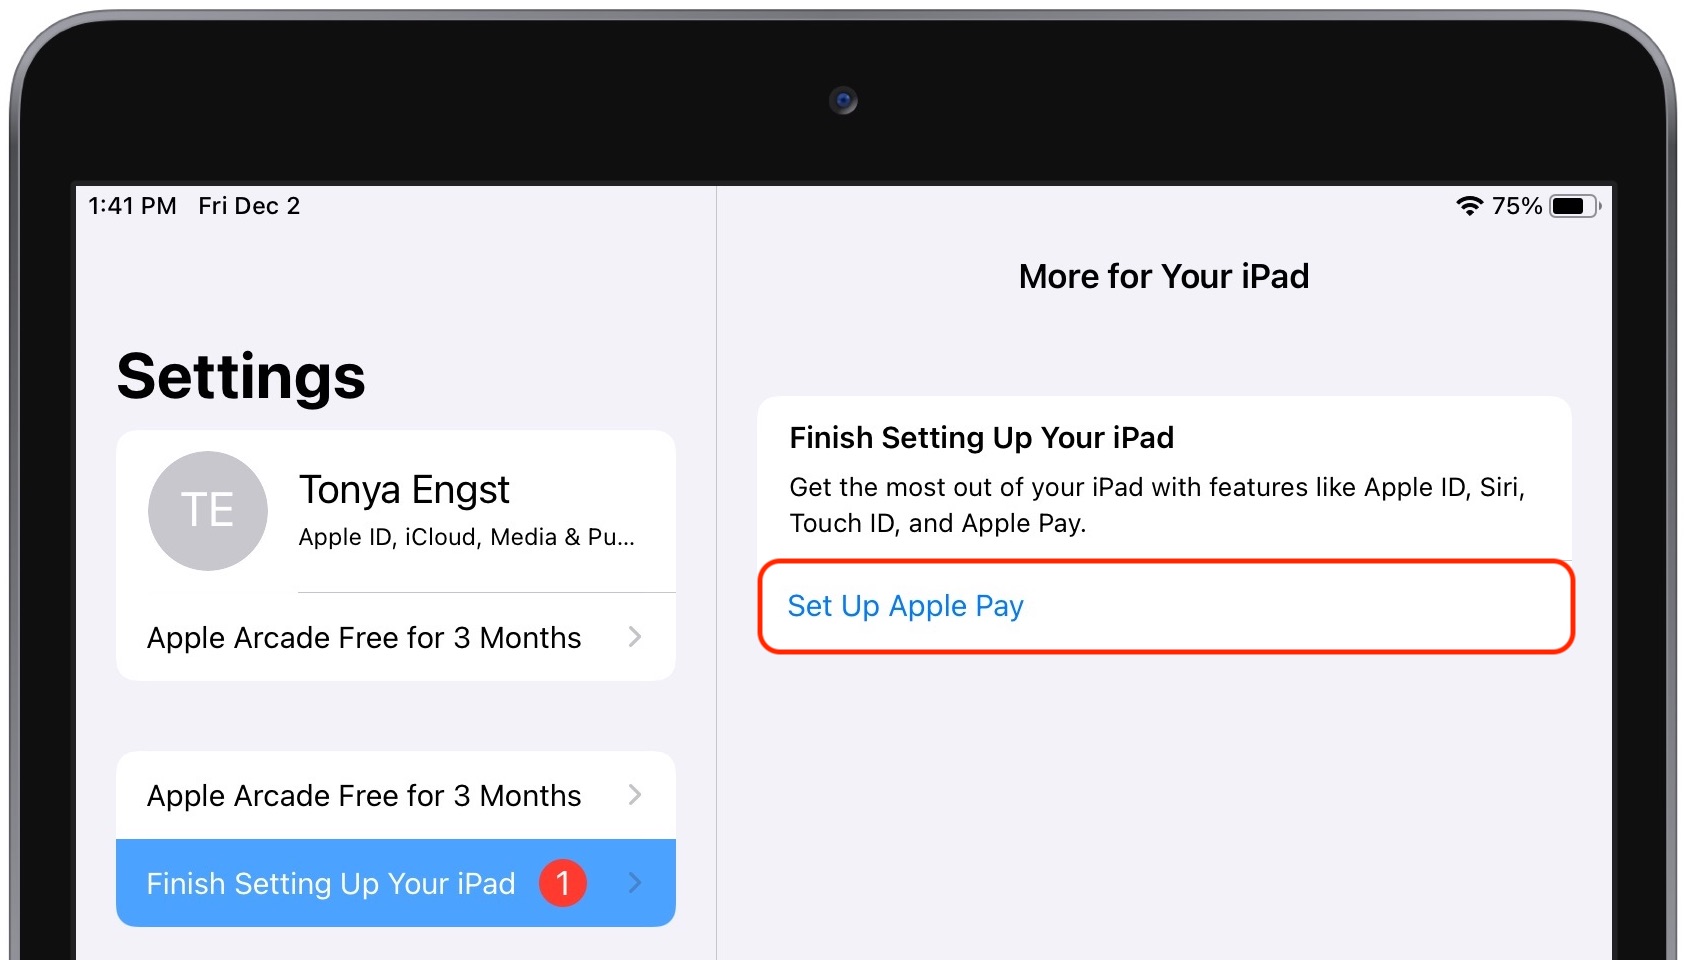 Apple Pay nag in Finish Setting Up Your iPad